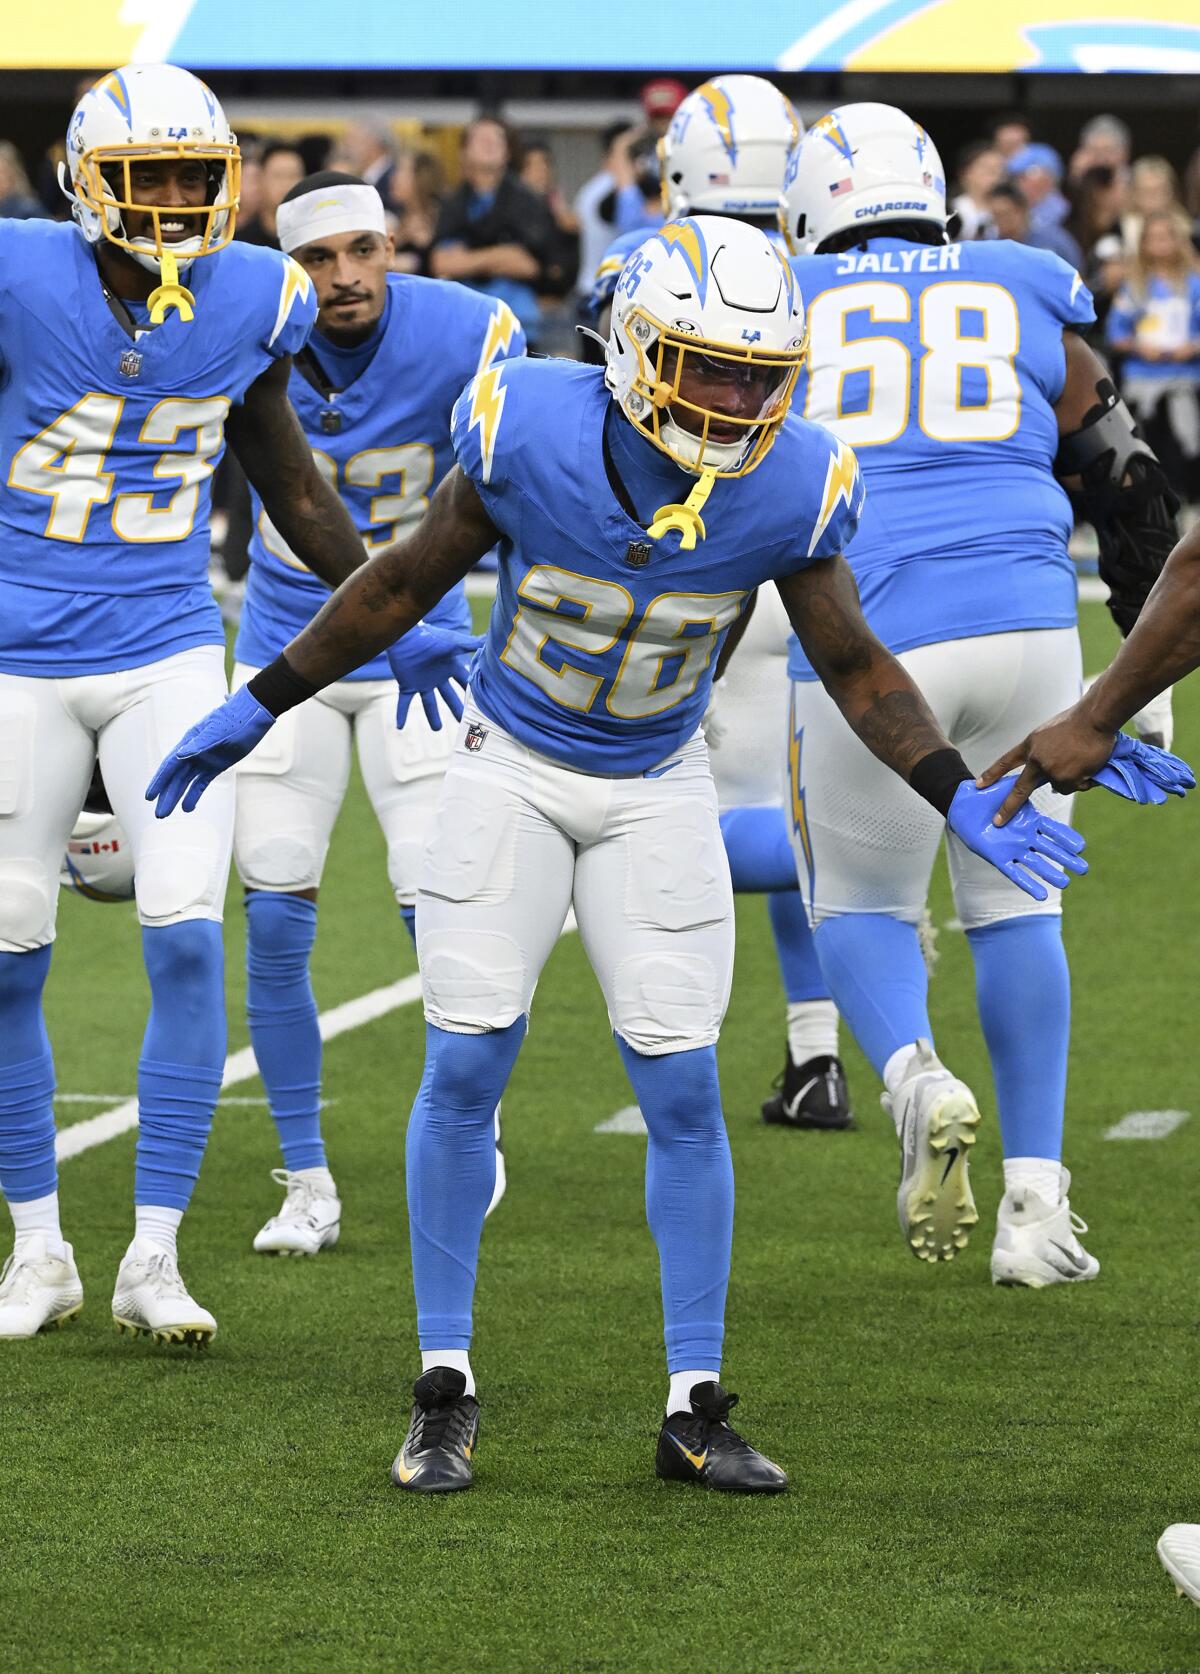 Chargers safety Dean Marlowe greets his teammates as they head onto the field before a game against the Bears